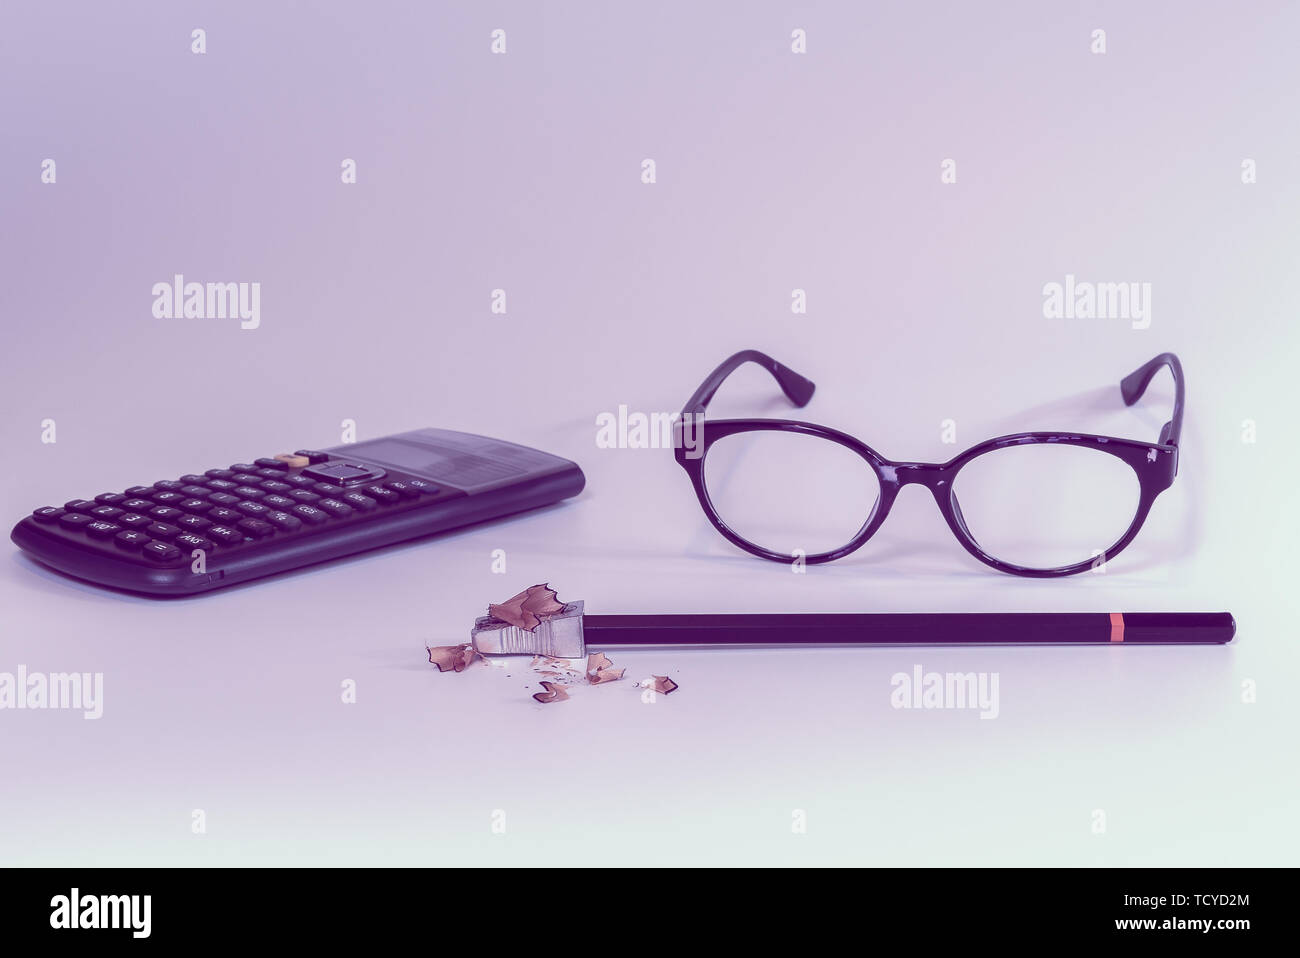 School or office supplies on a desk in feminine pink color with calculator, glasses, pencil and sharpener with wood shavings from sharpening Stock Photo